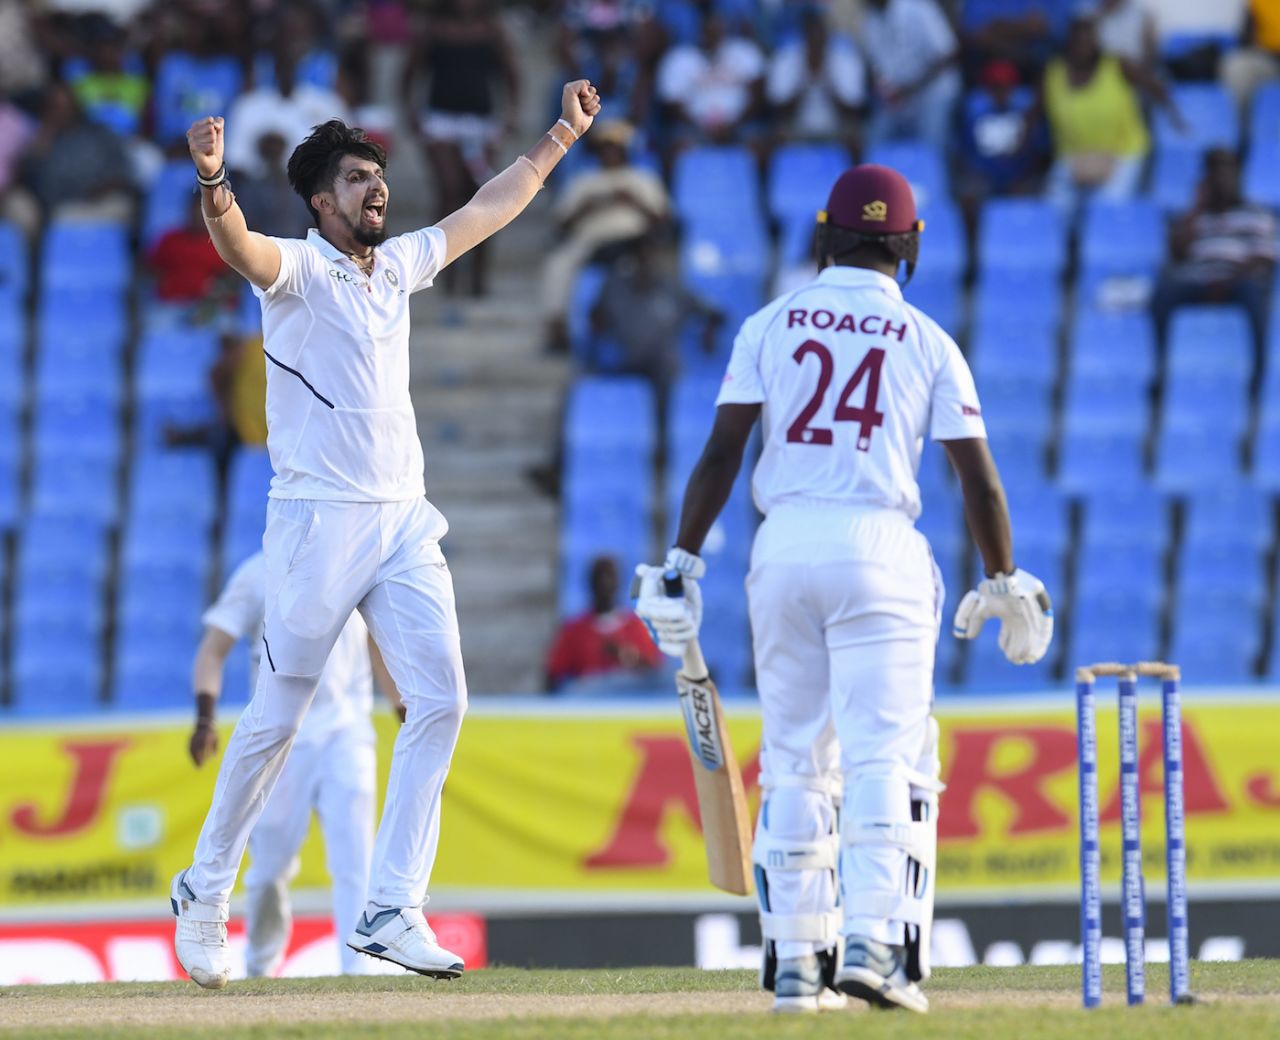 Ishant Sharma erupts after completing his five-for, West Indies v India, 1st Test, North Sound, 2nd day, August 23, 2019